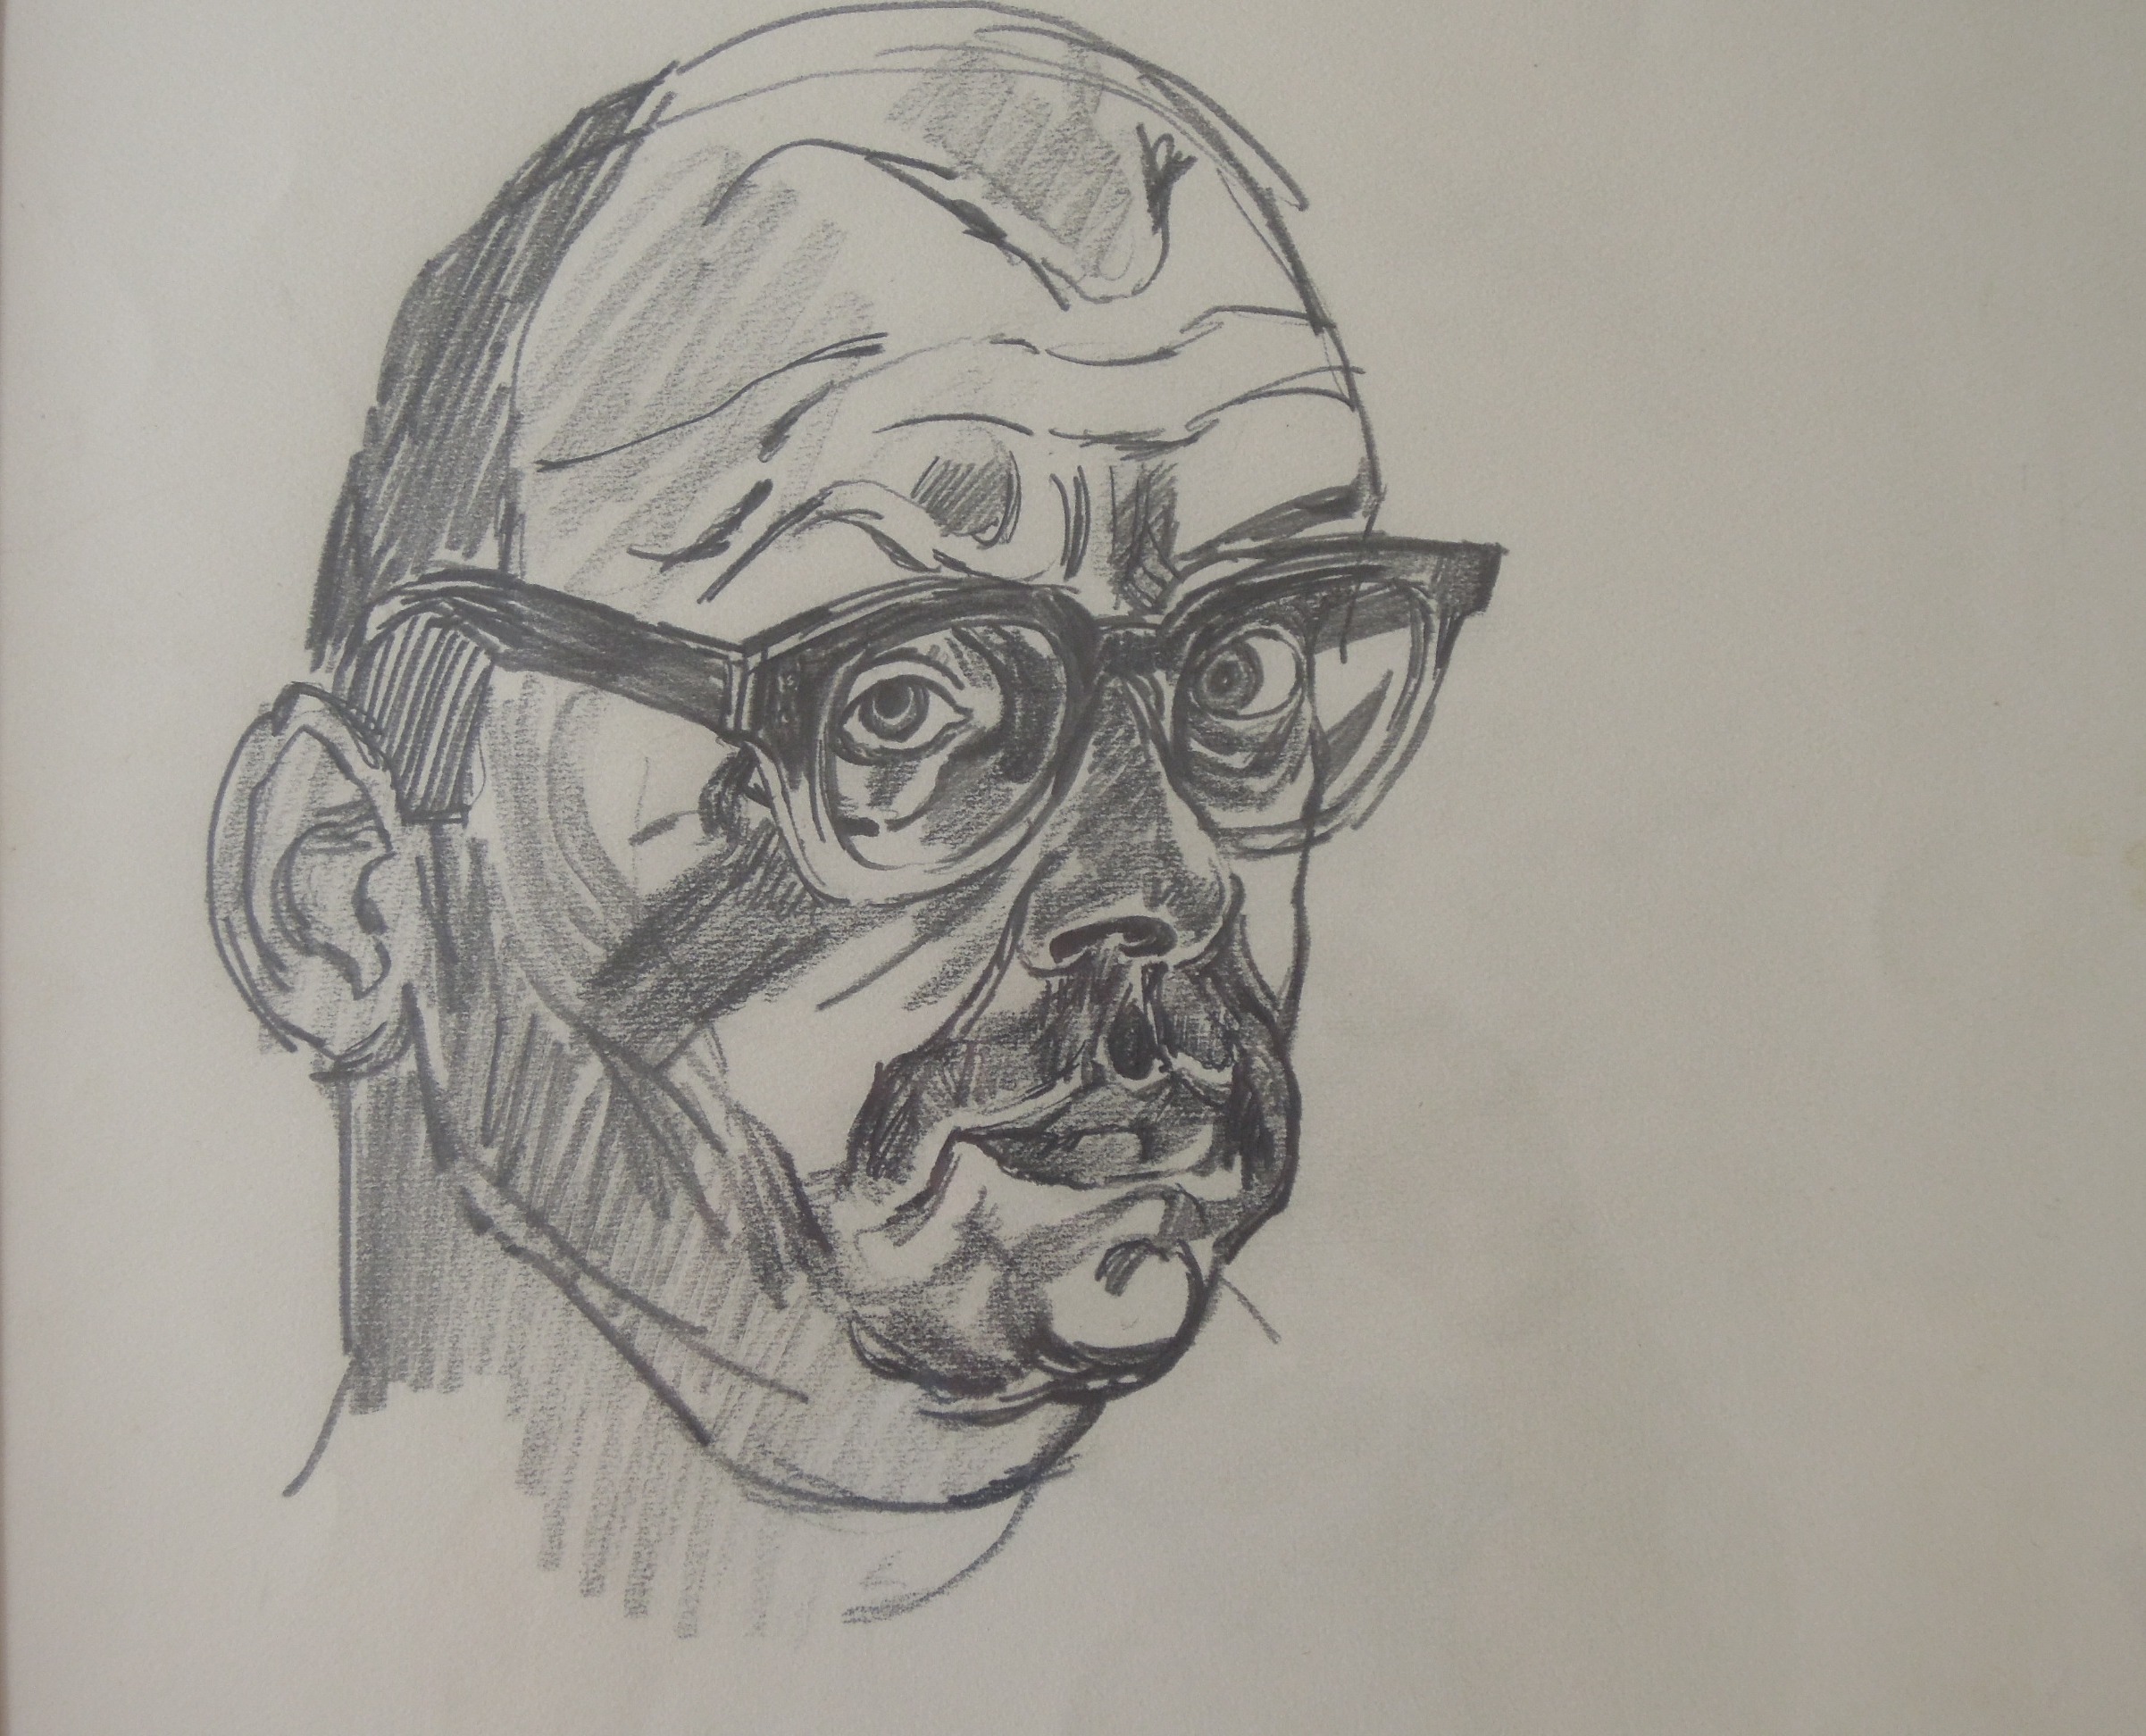 ‡JOHN BRATBY, RA (1928-1992)Self-Portraitpencil on paper19 ¾ x 14 ½ in (50 x 37cm)Provenance: from